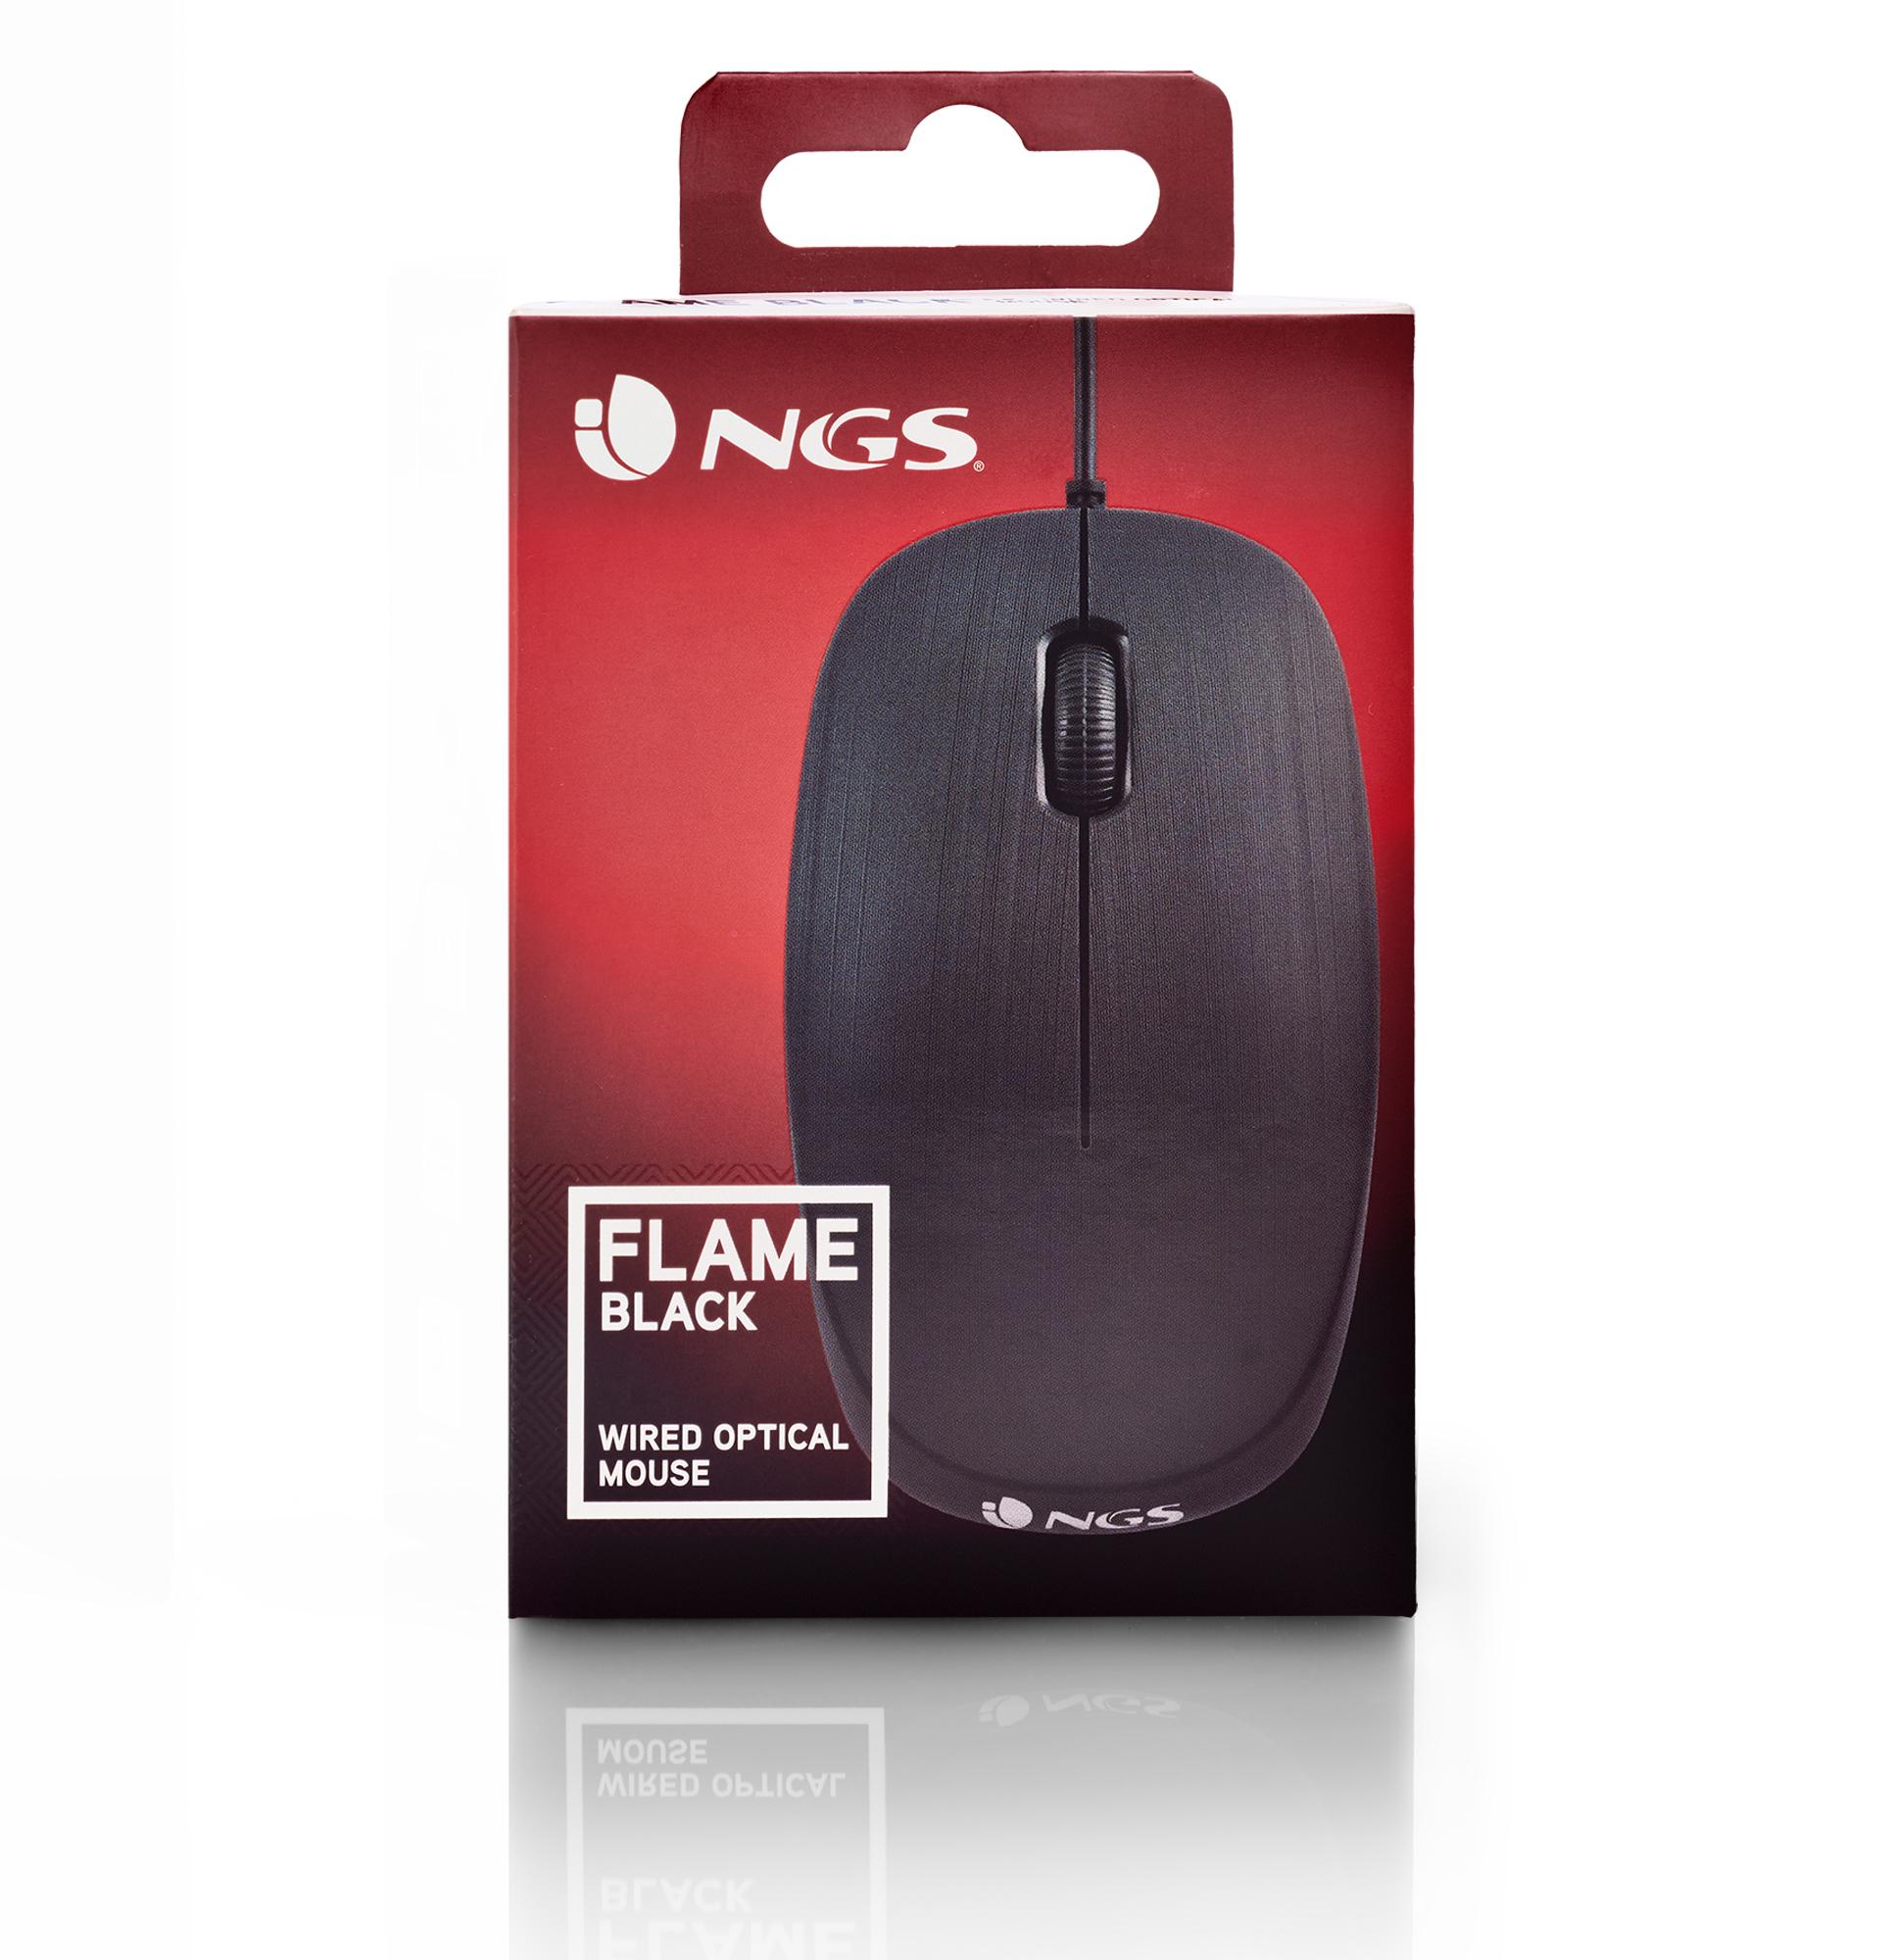 NGS FLAME Schwarz Maus